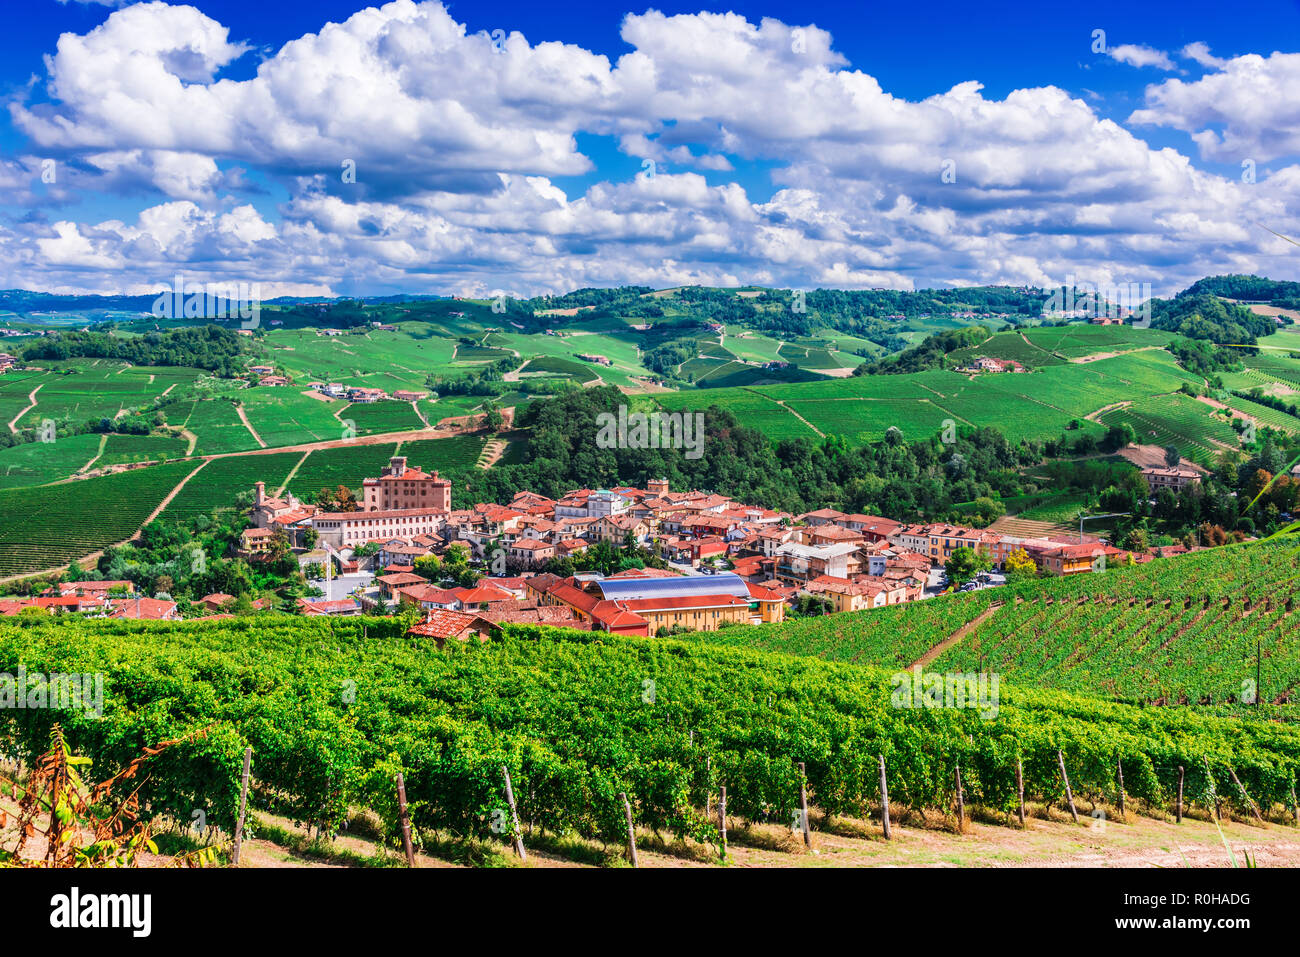 View of Barolo in the Province of Cuneo, Piedmont, Italy. Stock Photo